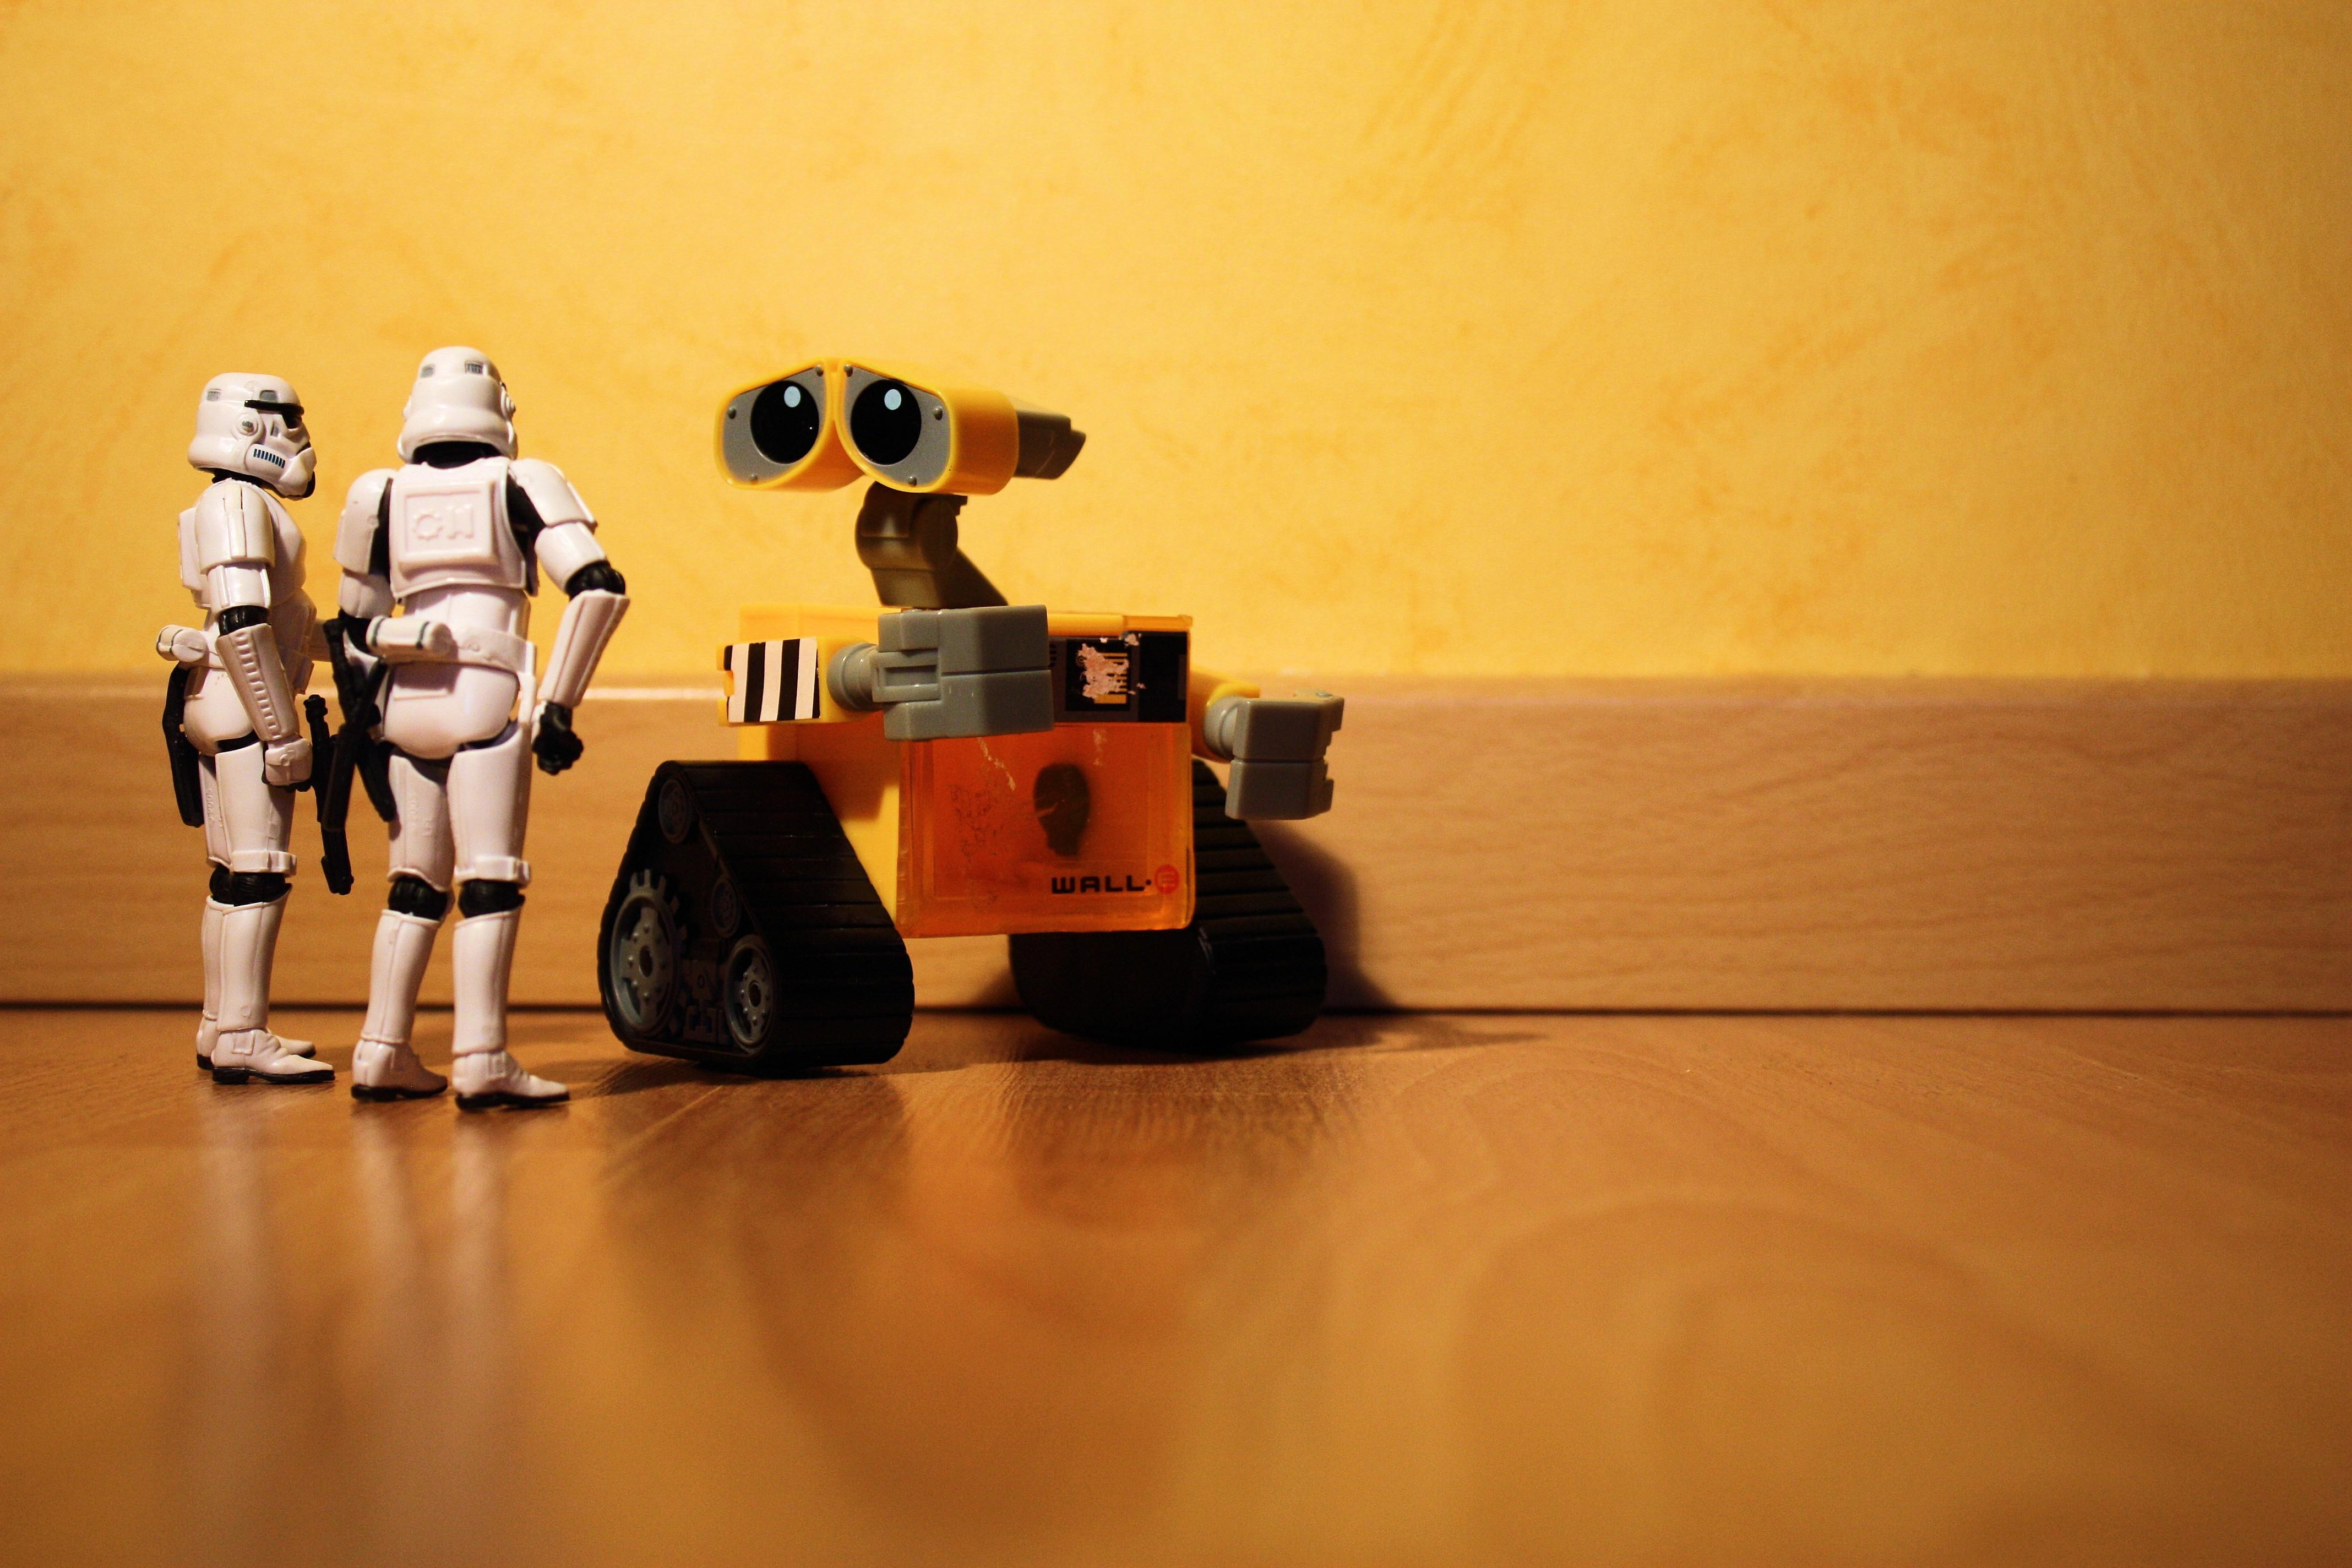 Star Wars, Robots, Stormtroopers, Wall E, Miniature, Figurines